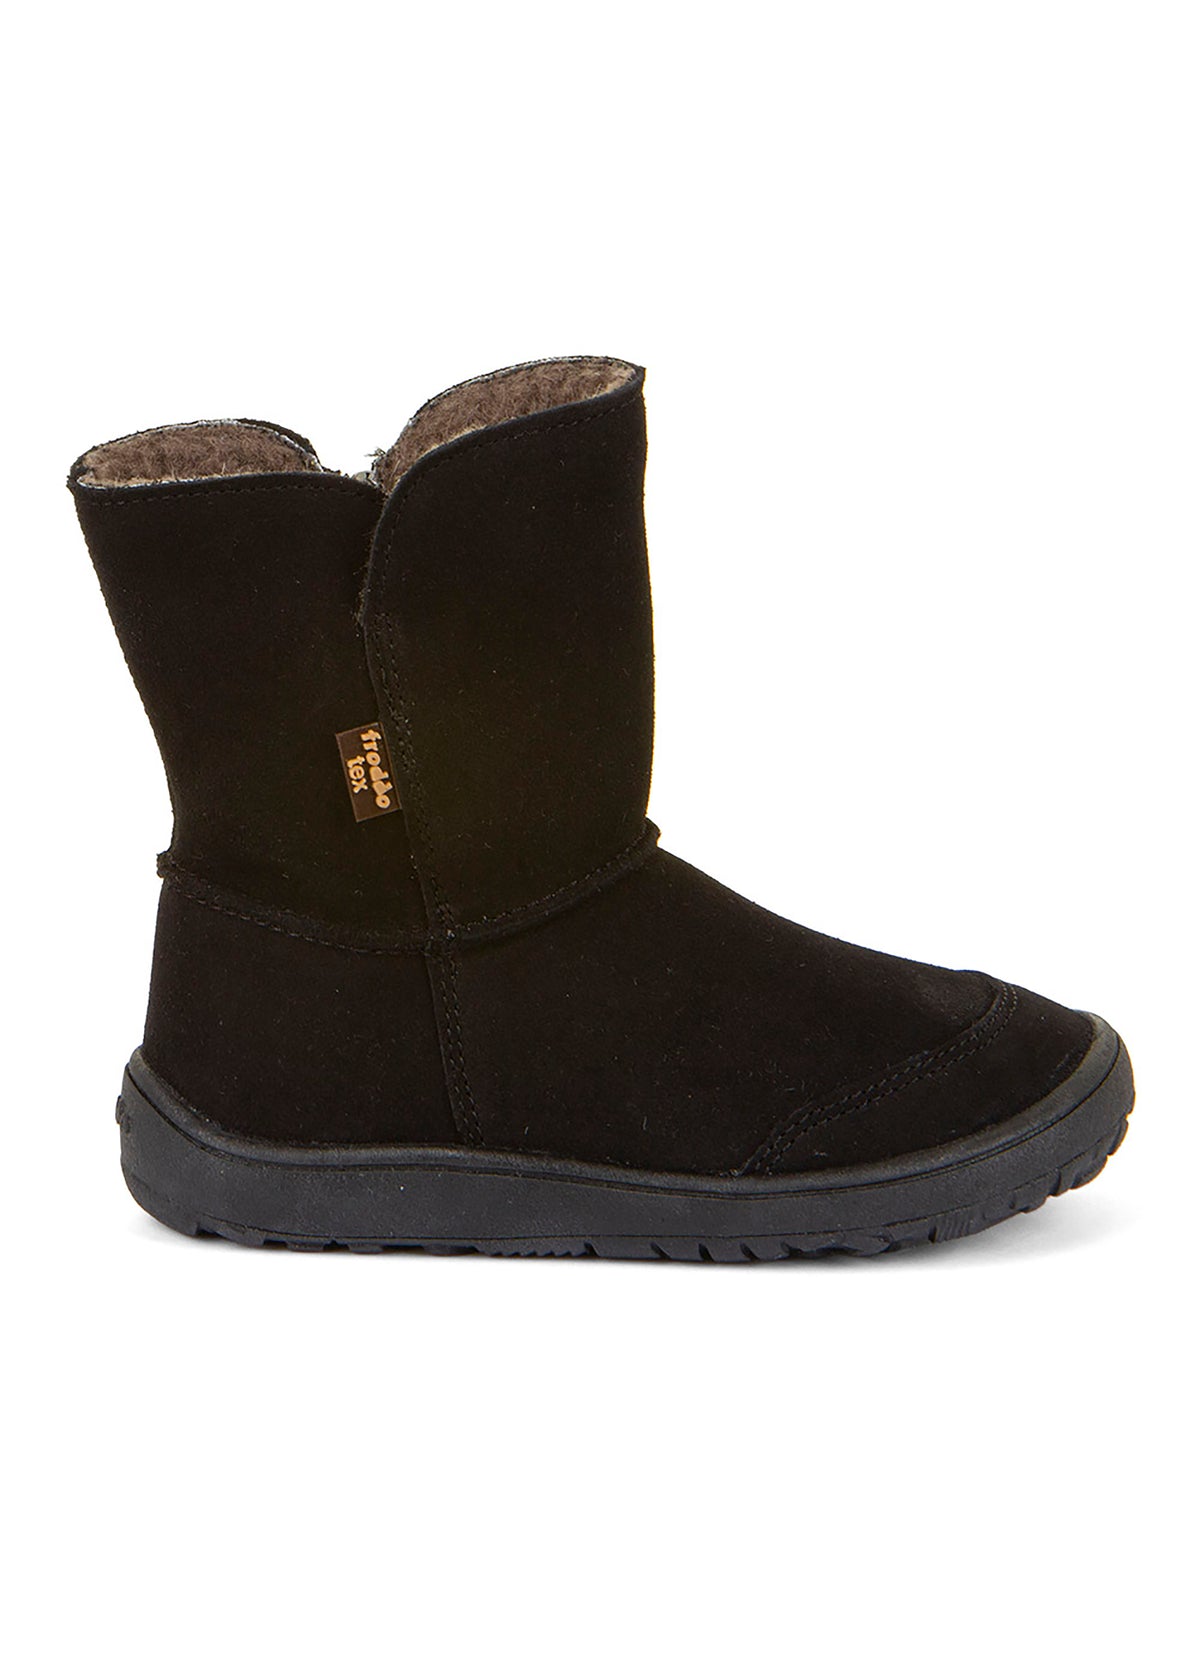 Barefoot shoes - leather winter boots, TEX Suede - black